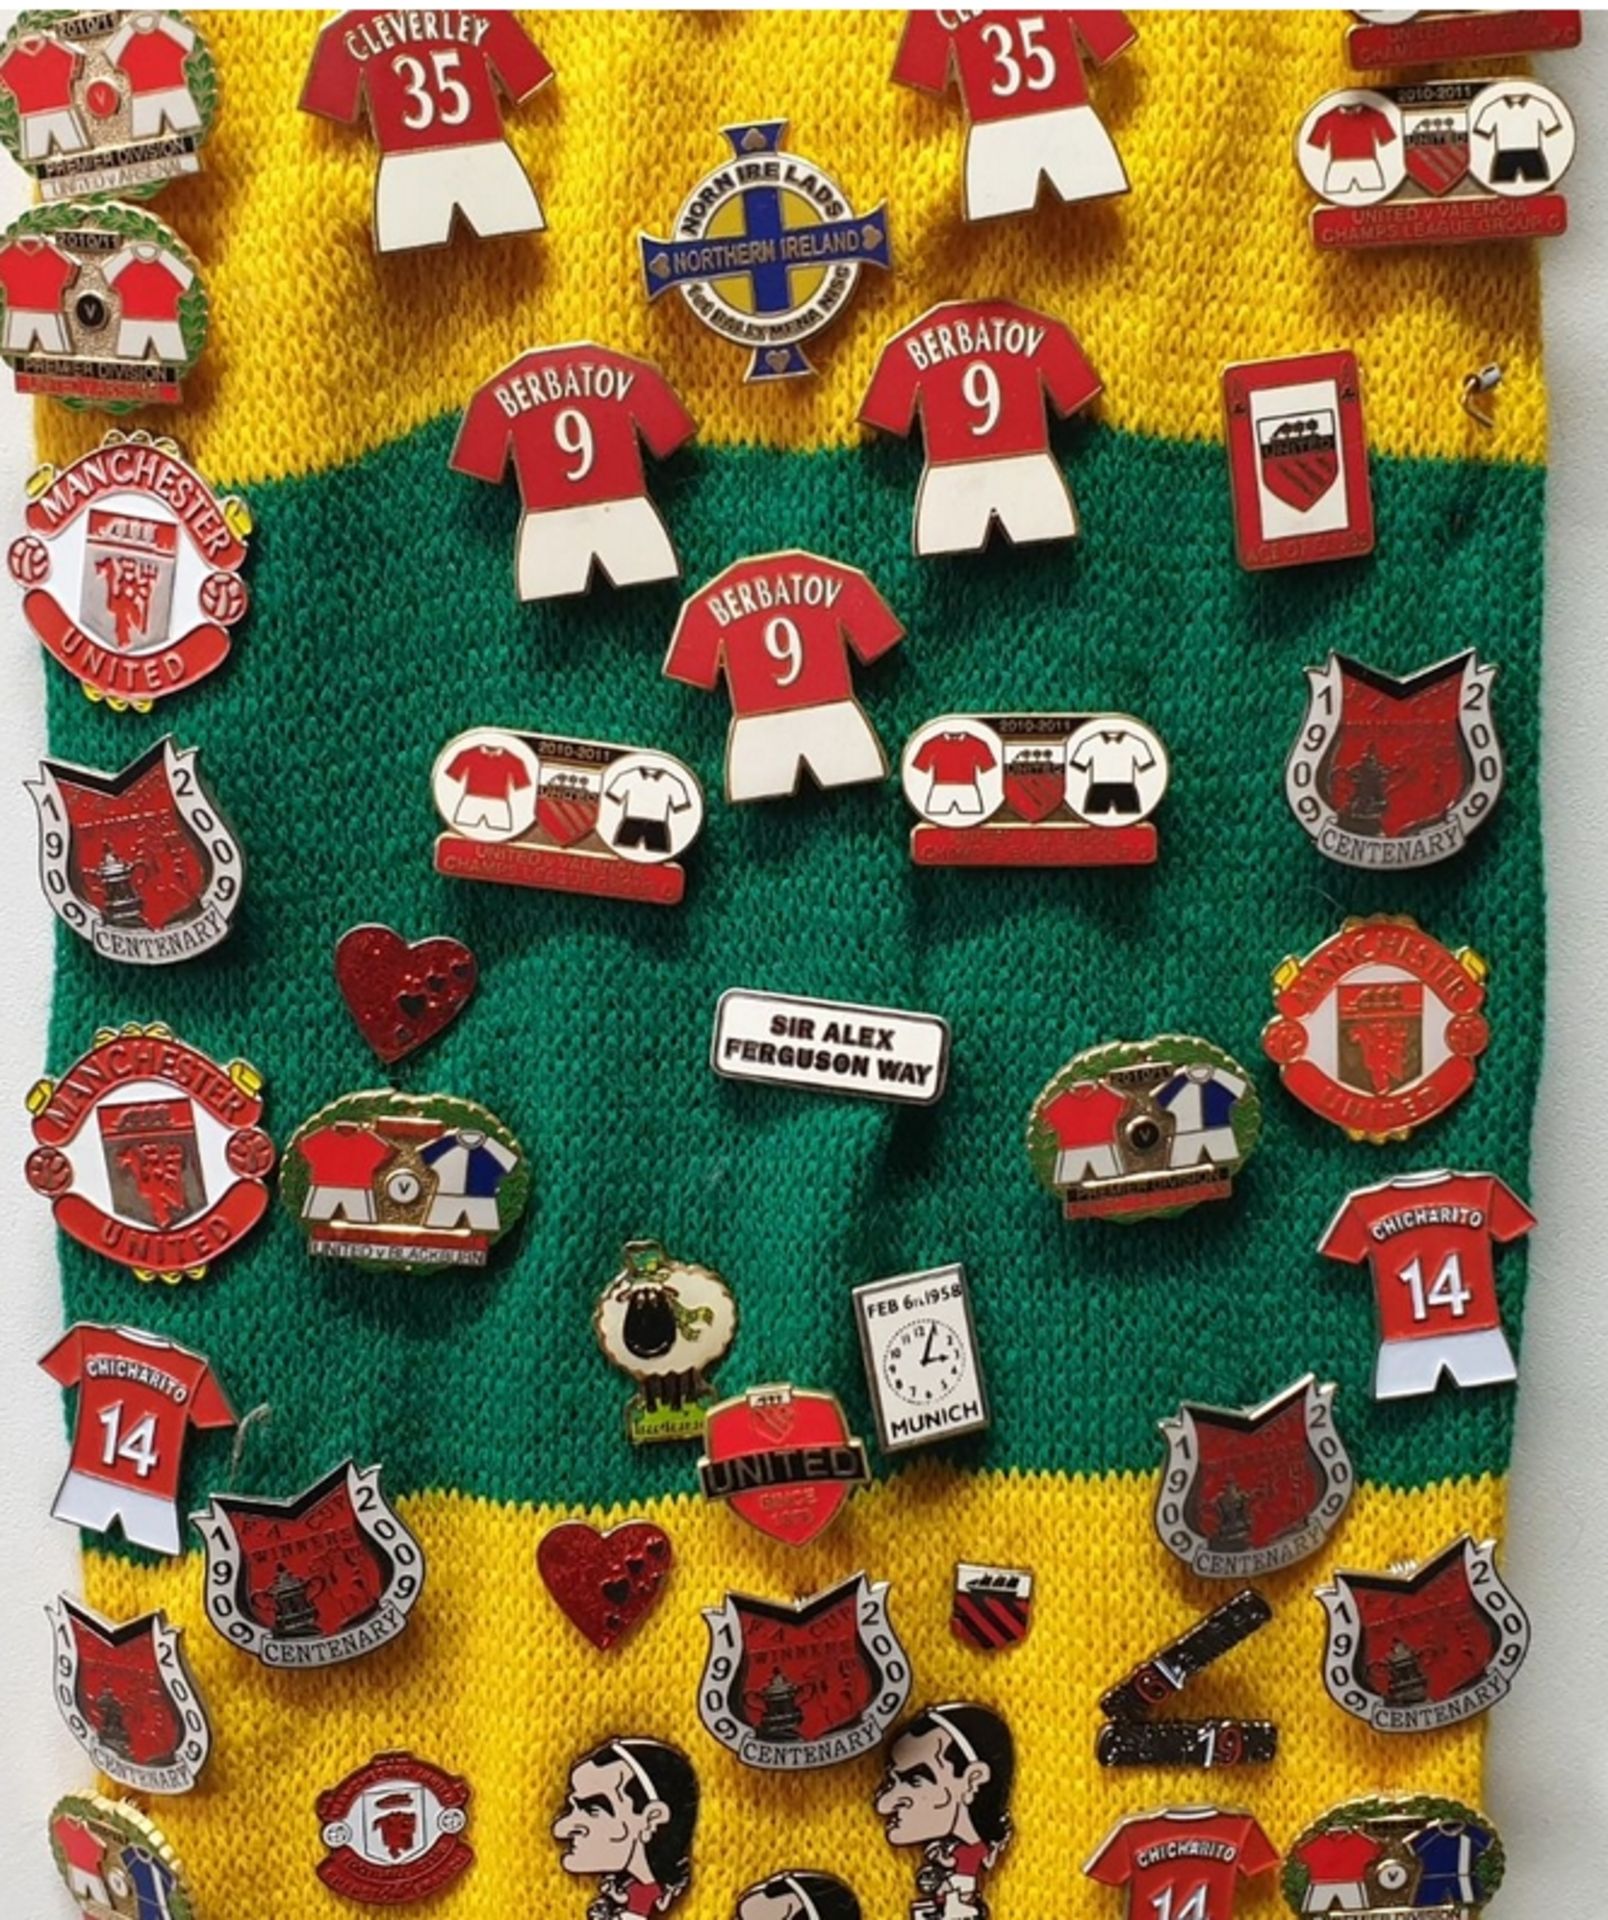 50 X Randomly Picked Manchester United Pin Badges - Image 3 of 6